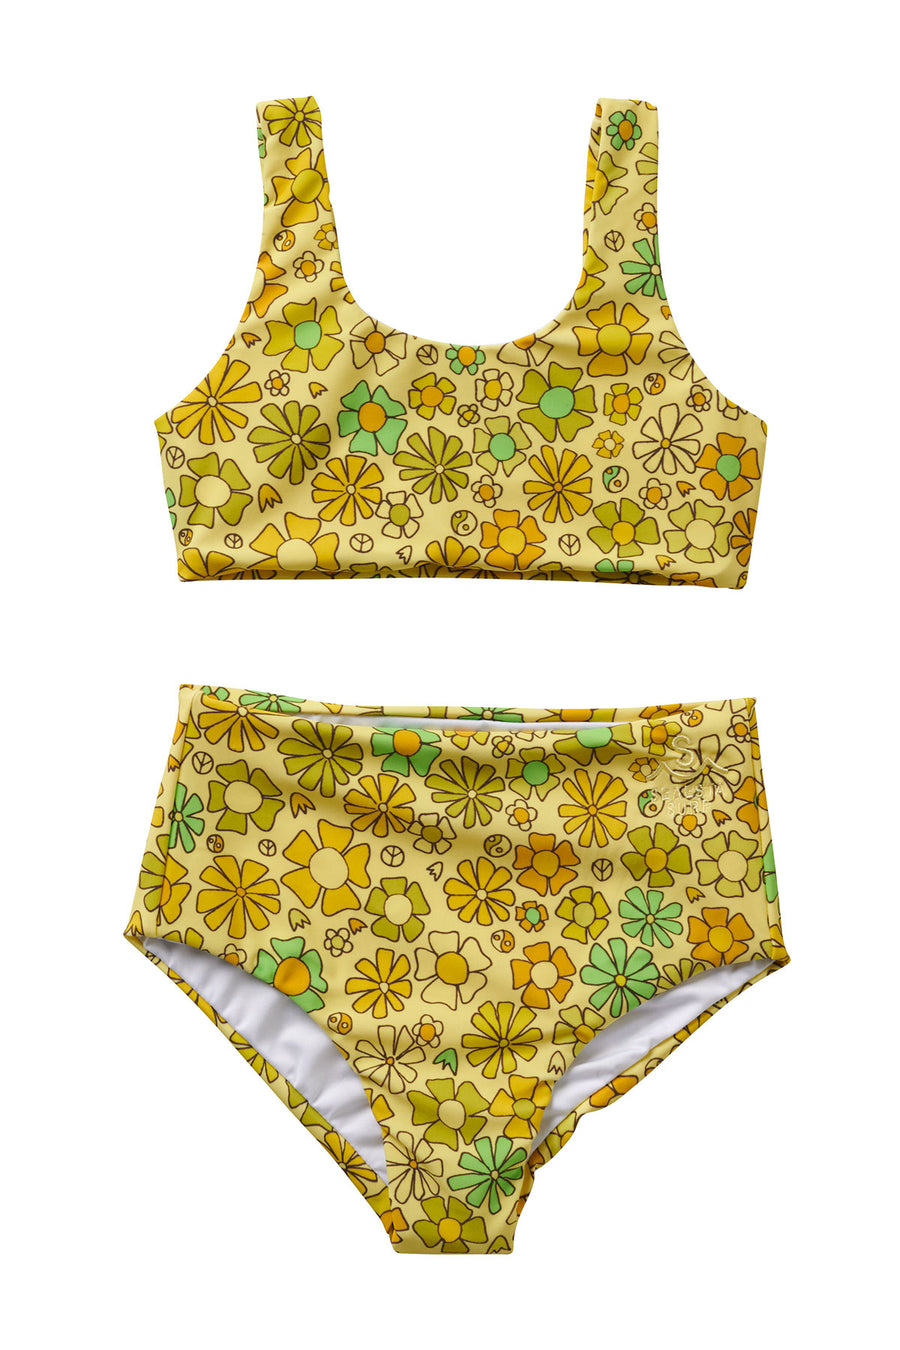 Surfy Birdy x Seaesta Surf / Surfy 60s / Chartreuse Two Piece Swimsuit